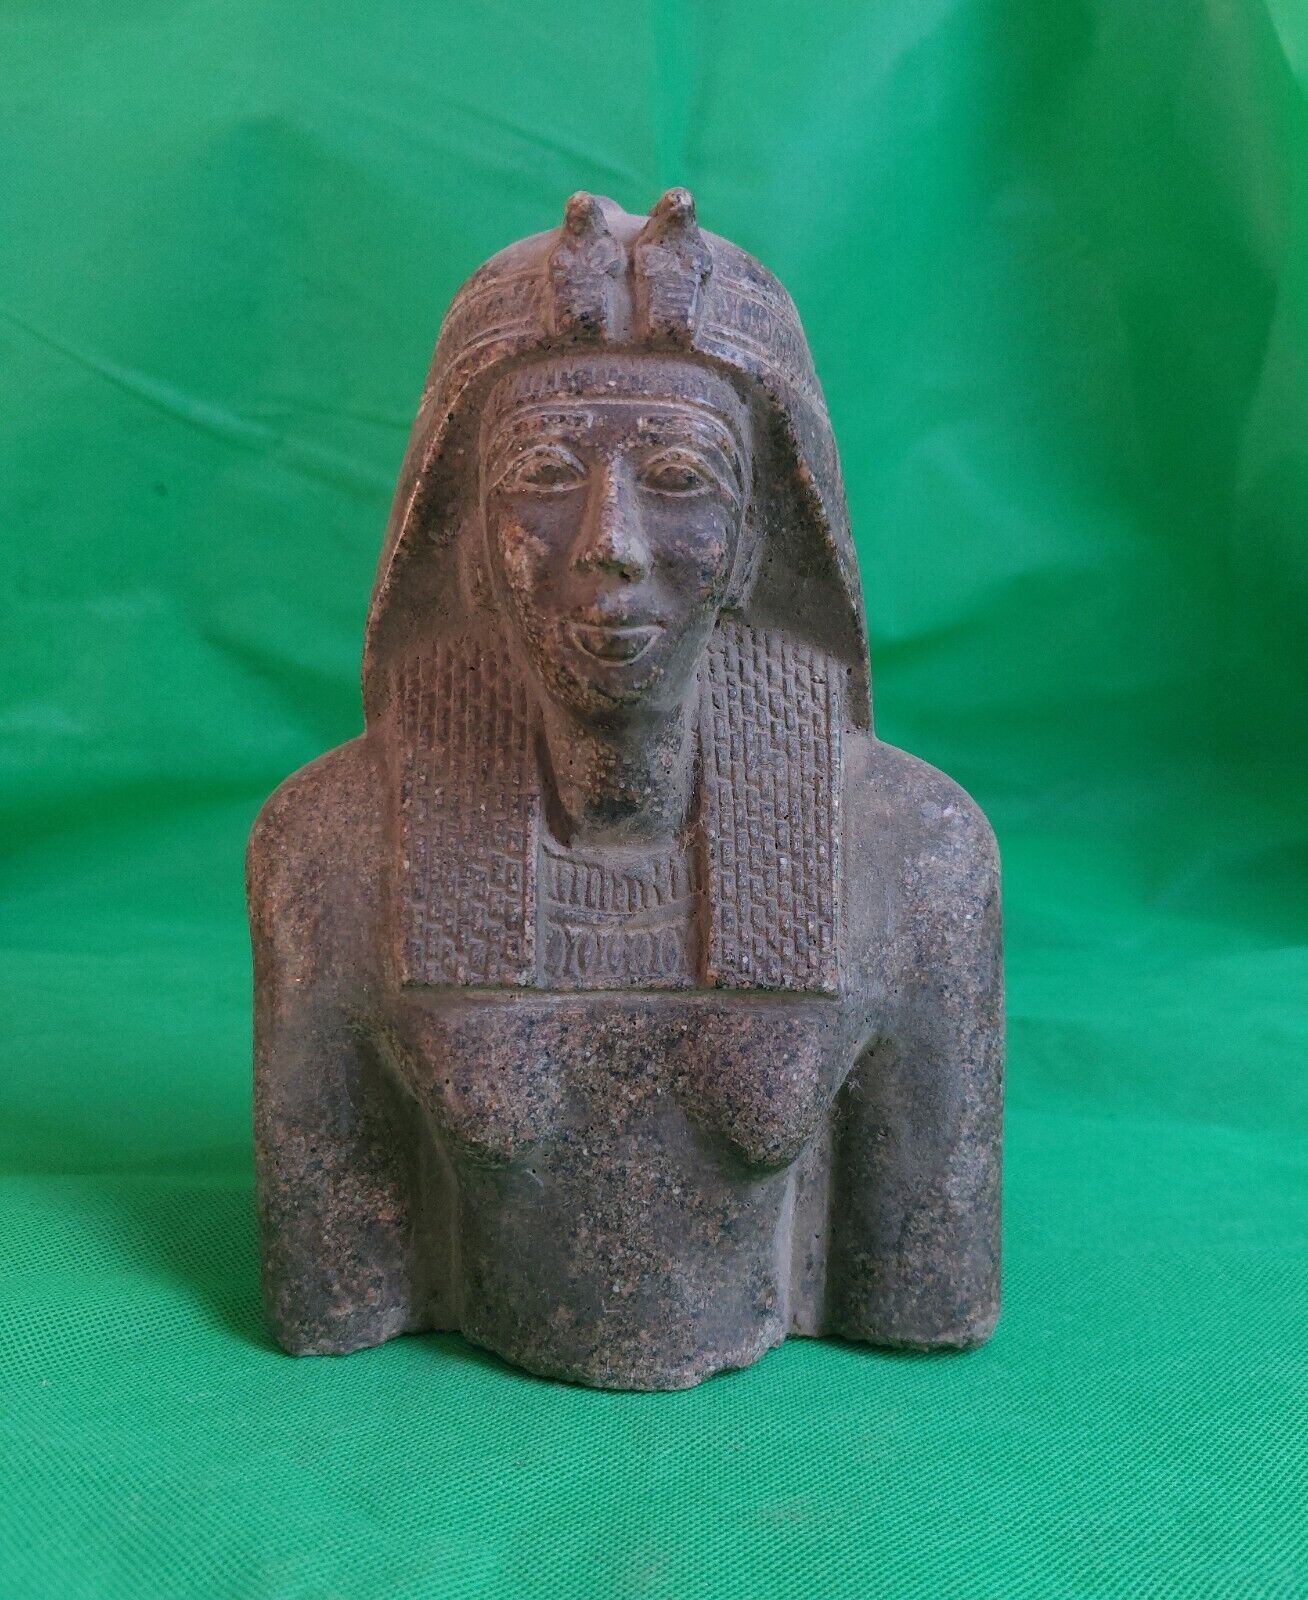 Rare Egyptian Antique The greatest of the rulers of ancient Egypt Thutmose III